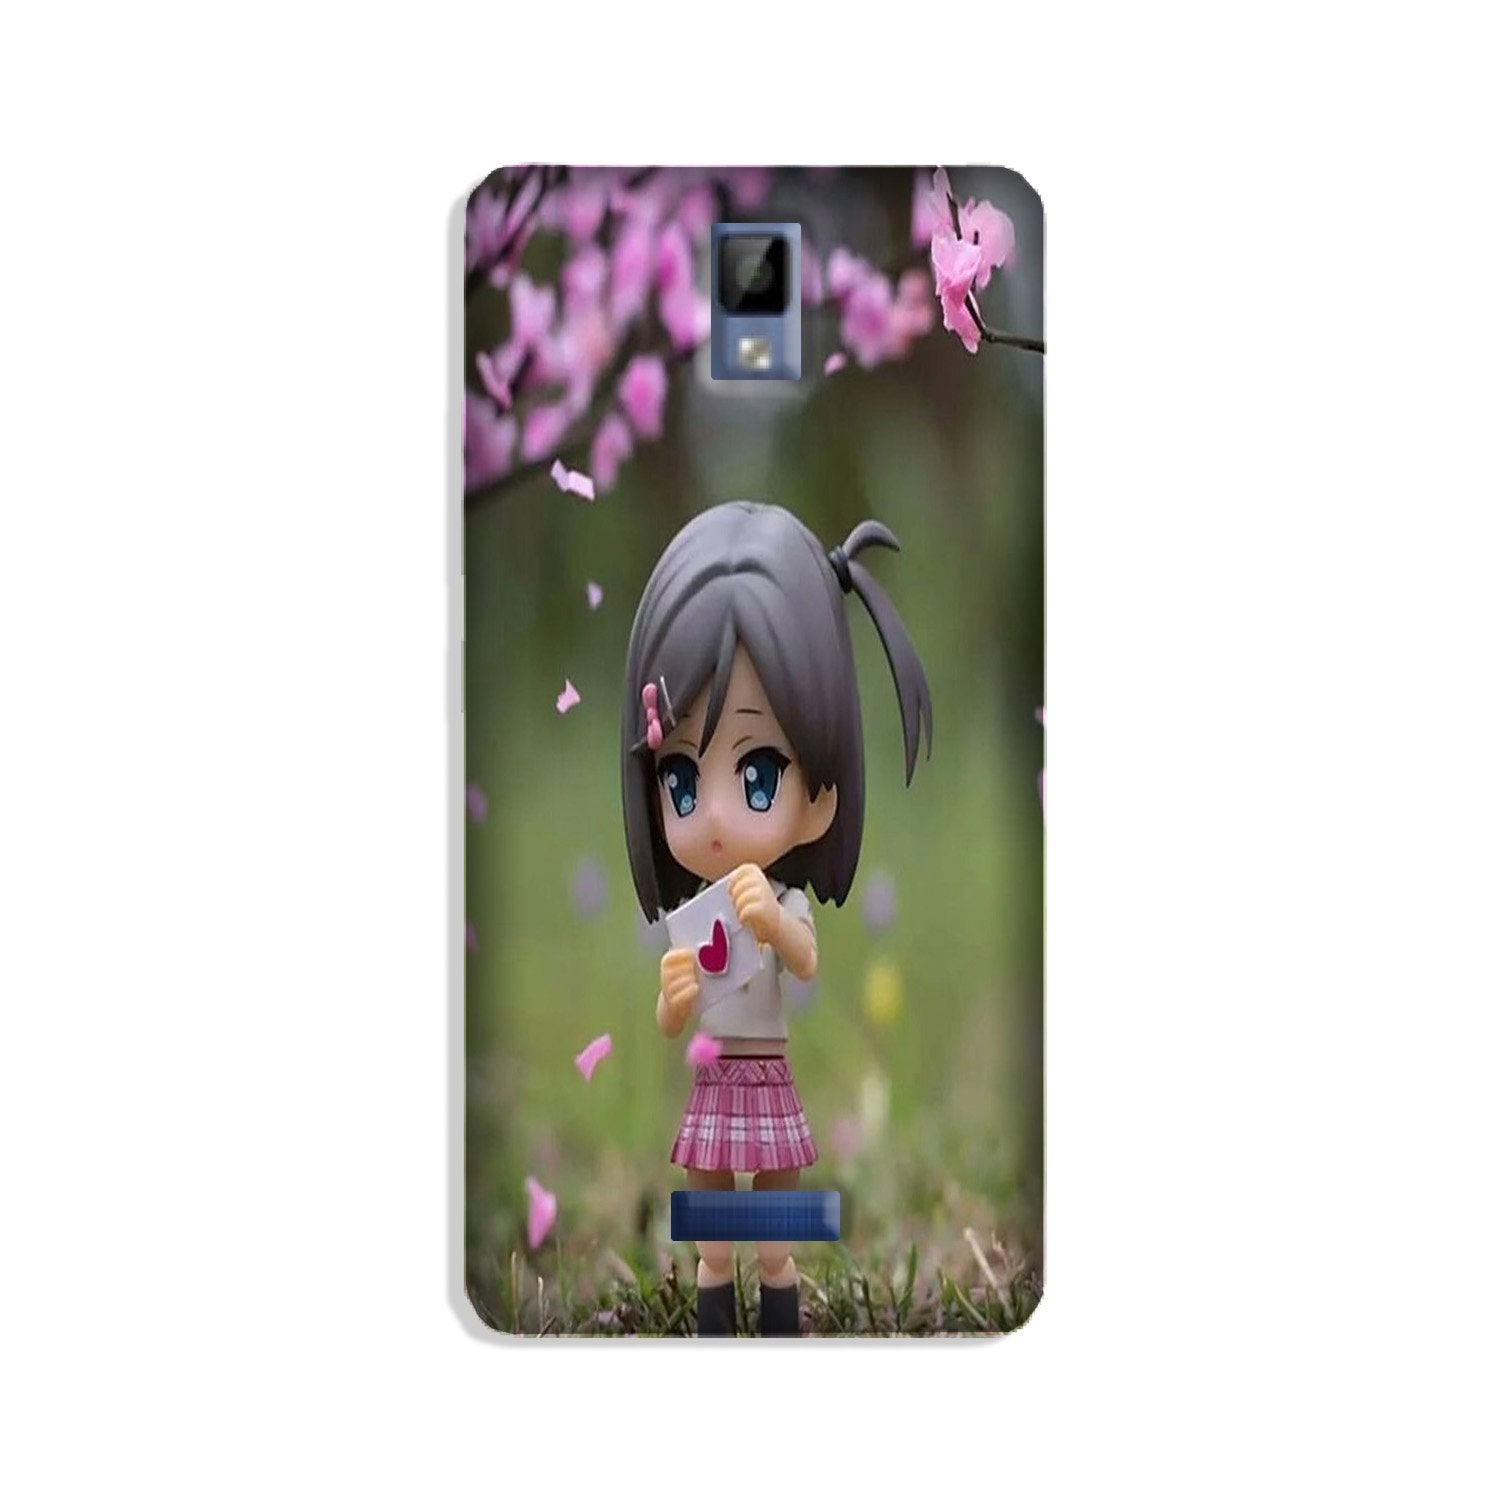 Cute Girl Case for Gionee P7